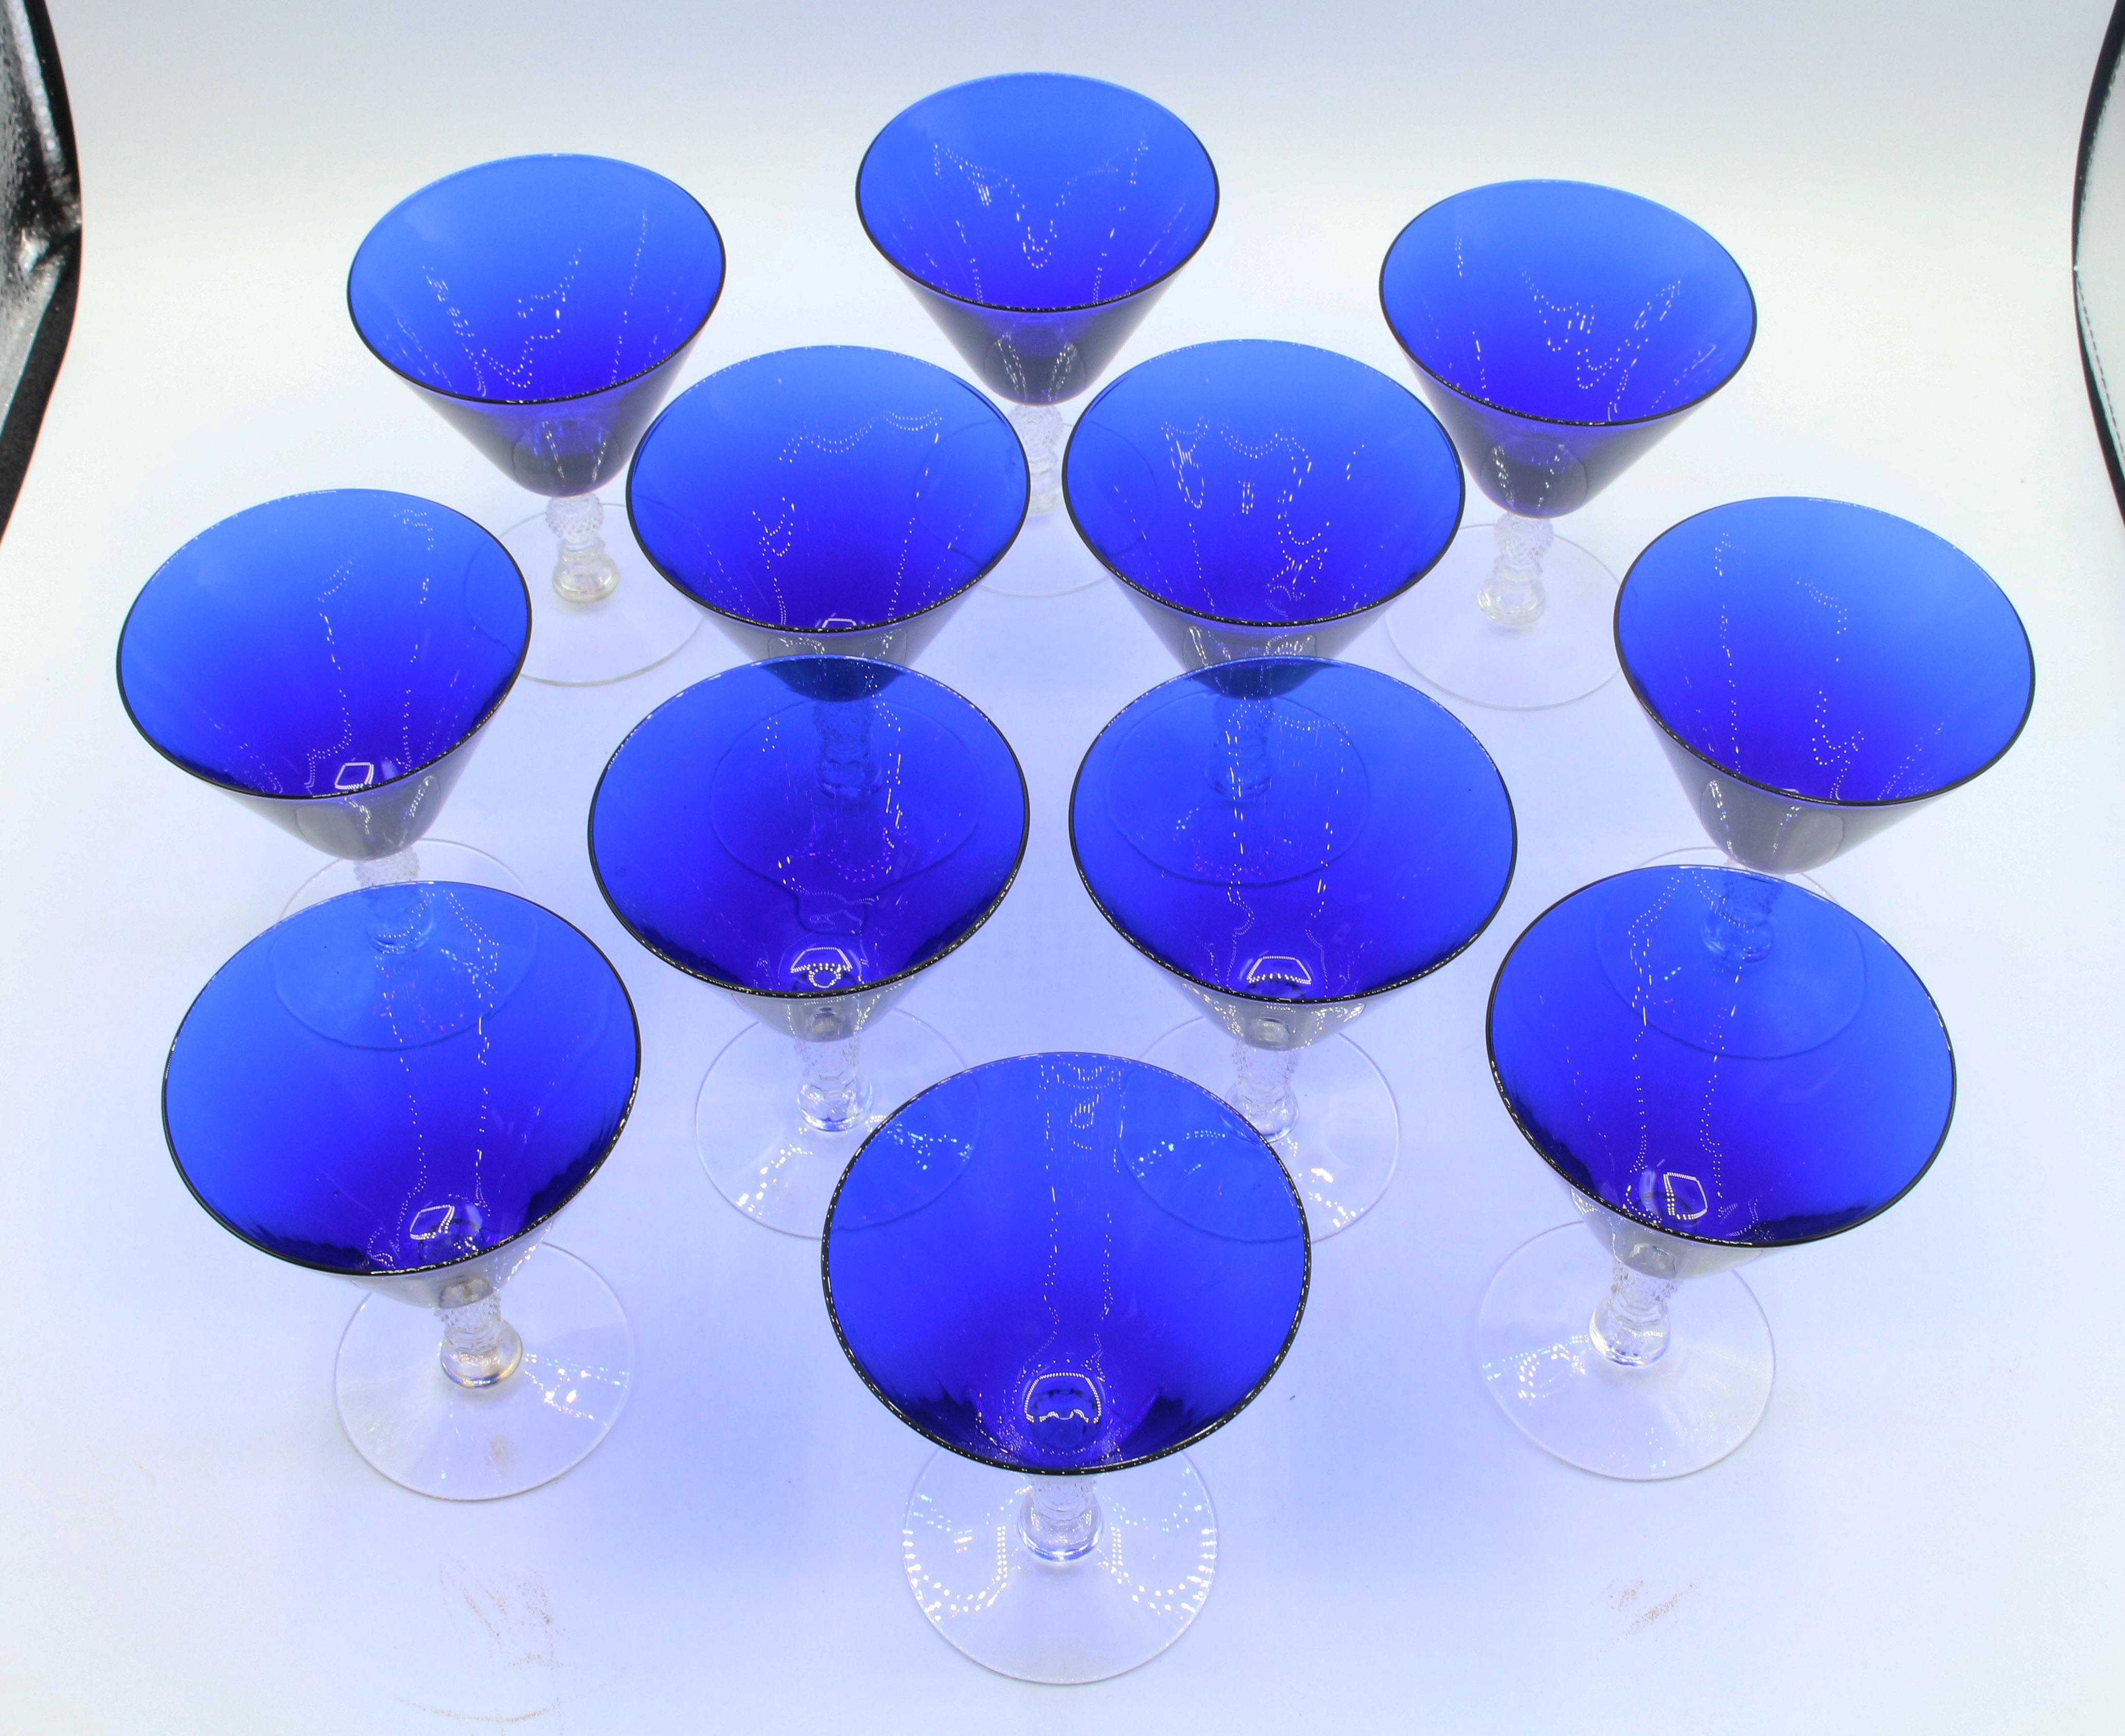 A set of 12 oyster glasses by Cambridge Glass Co., Ohio, c.1930s. Cobalt Blue bowls with faceted, molded clear glass stems & bases. Pattern 3122, rarely found. One with outer rim small rough spot.
4 5/8